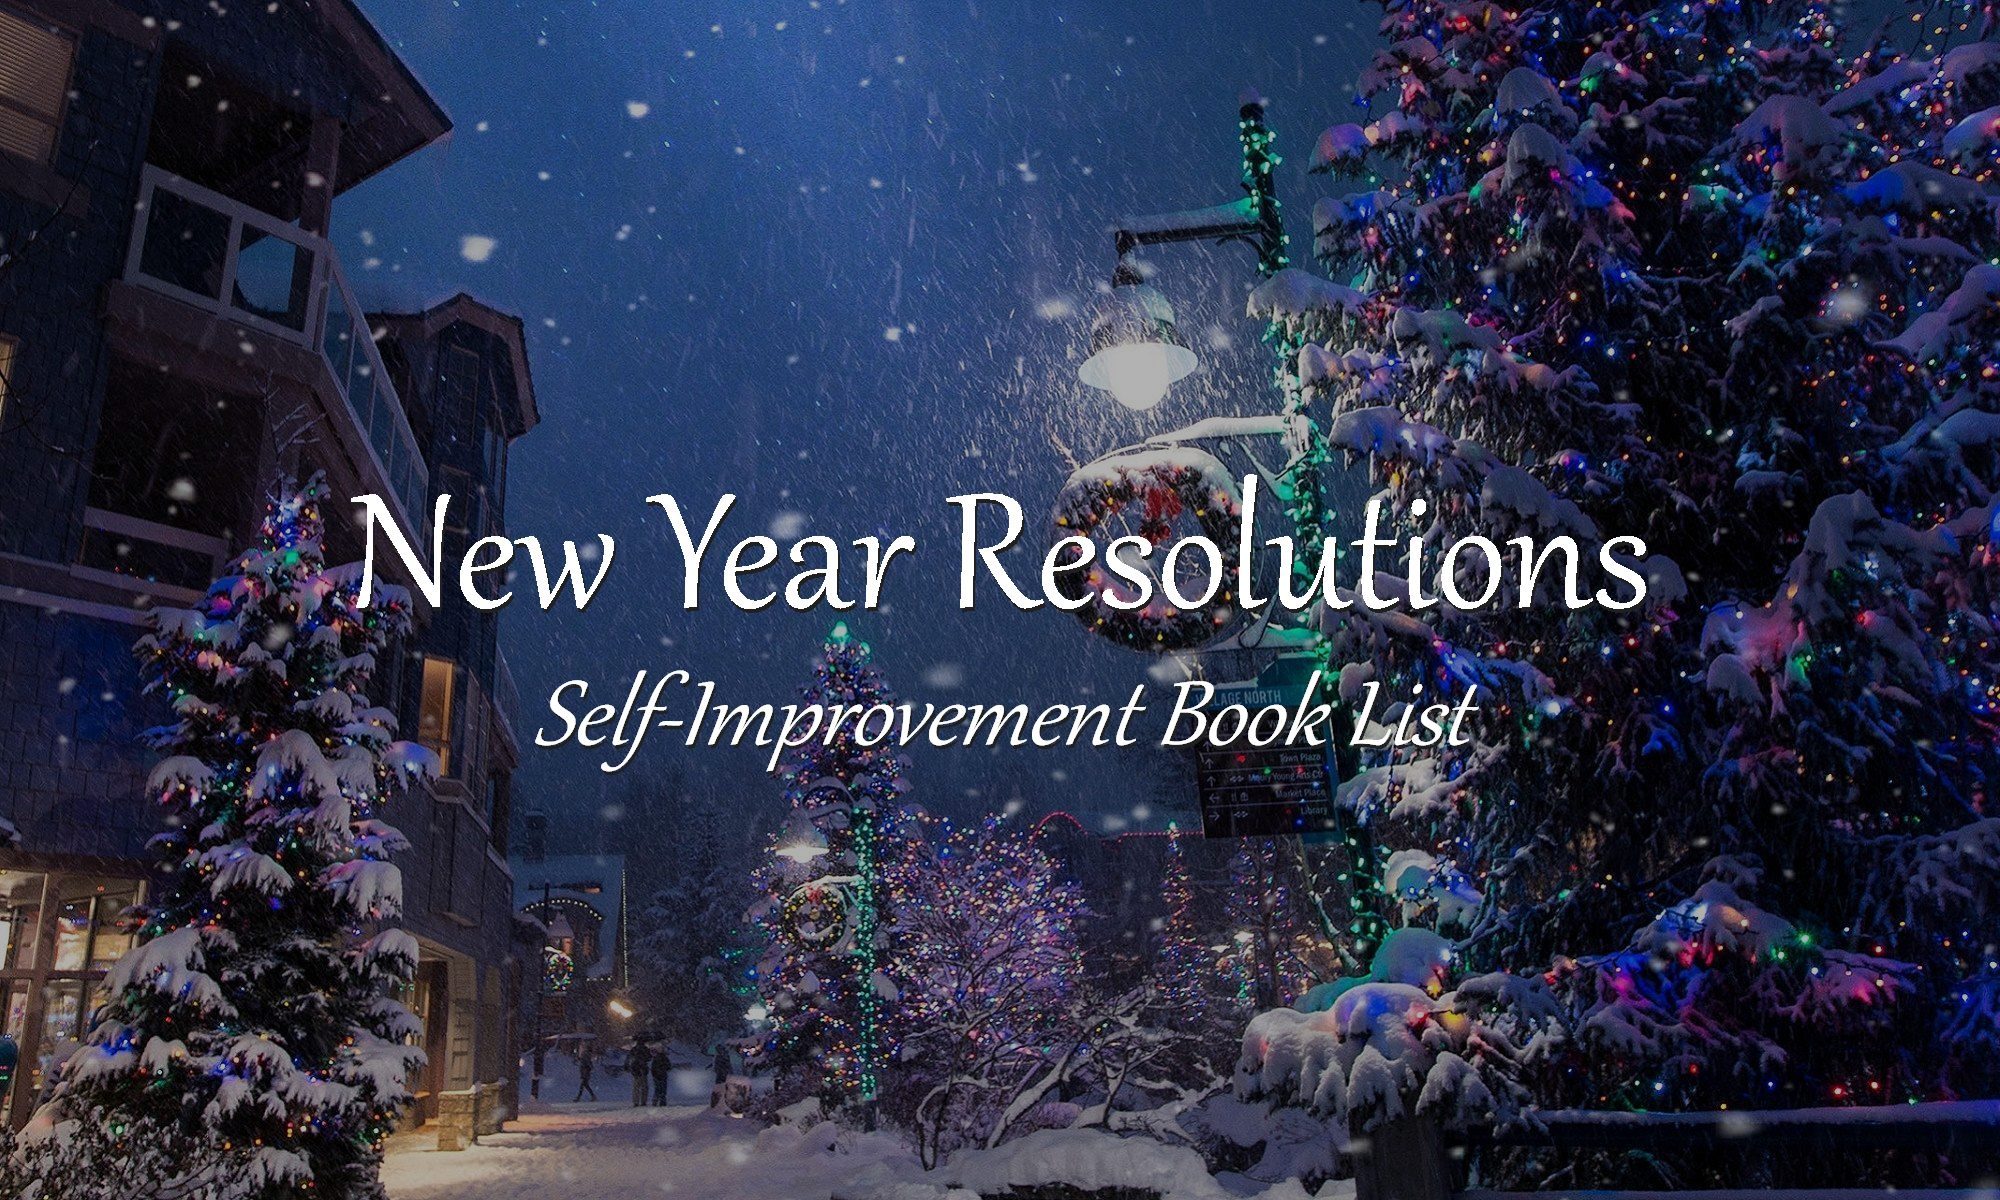 new-year-resolutions-self-improvement-book-list-metaphysical-affirmations-to-manifest-money-success-Christmas-book-gift